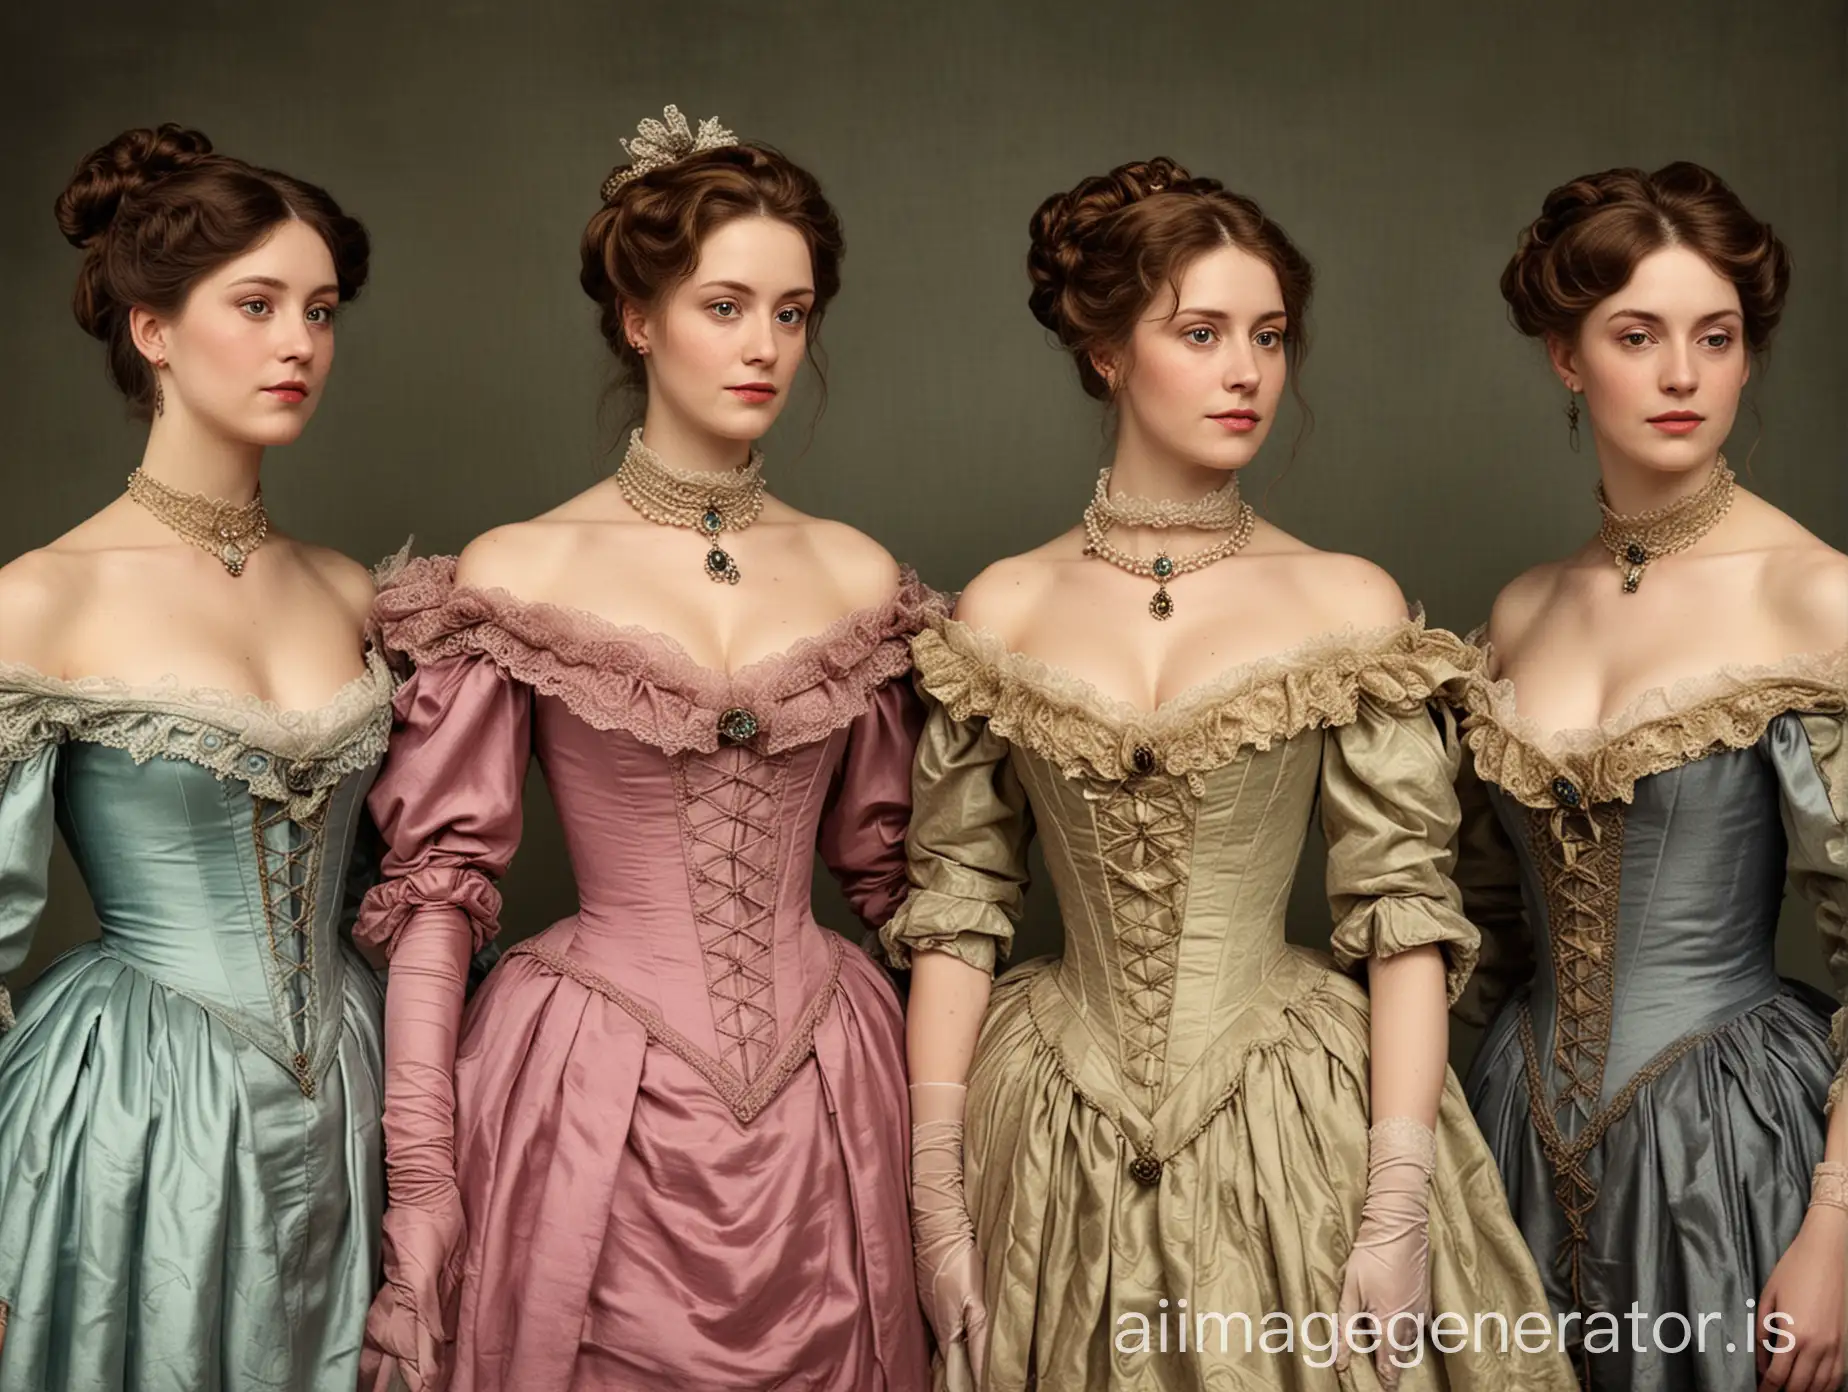 Beautiful Victorian Era Noblewoman Group With Shoulderless Gown, With Enticing Necklines